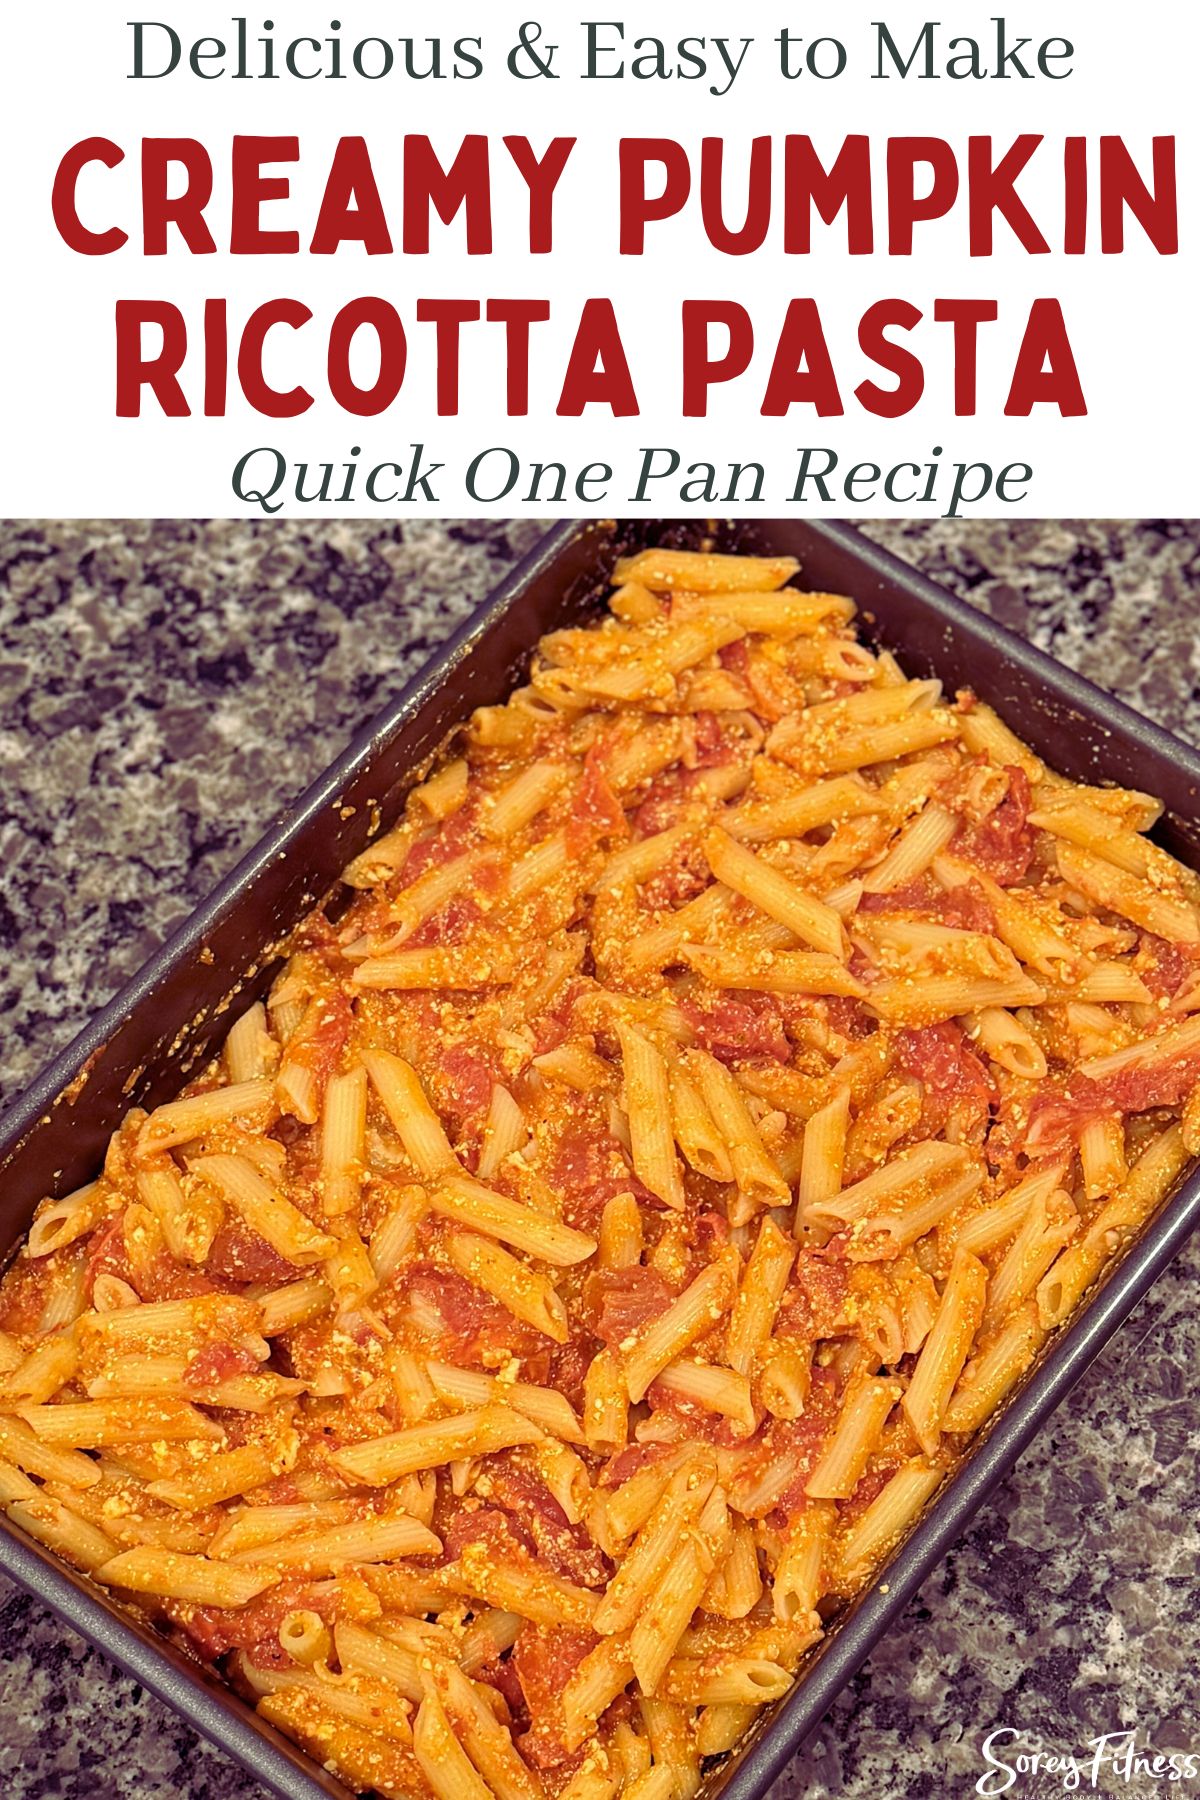 the final pumpkin ricotta pasta in a 9x13 pan - text overlay says delicious and easy to make creamy pumpkin ricotta pasta quick one pan recipe